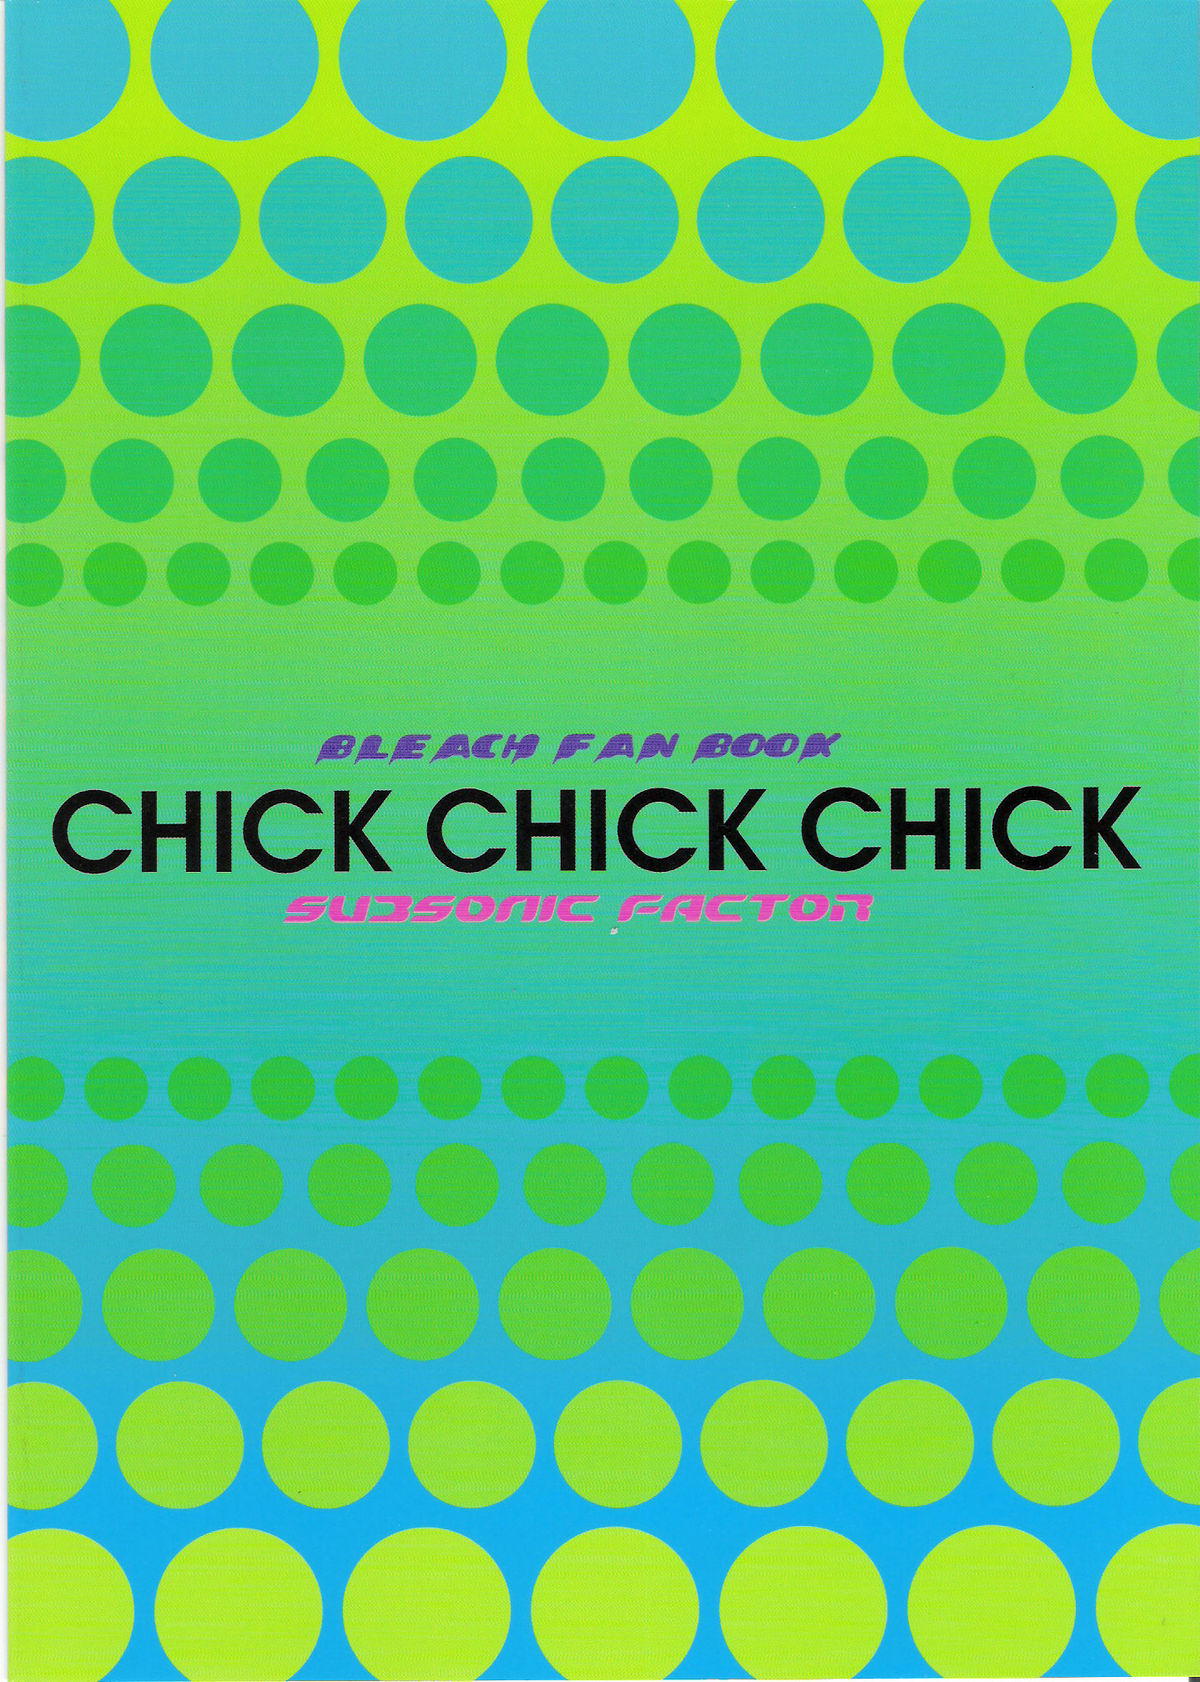 (C74) [SUBSONIC FACTOR (立嶋りあ)] CHICK CHICK CHICK (ブリーチ) [英訳]